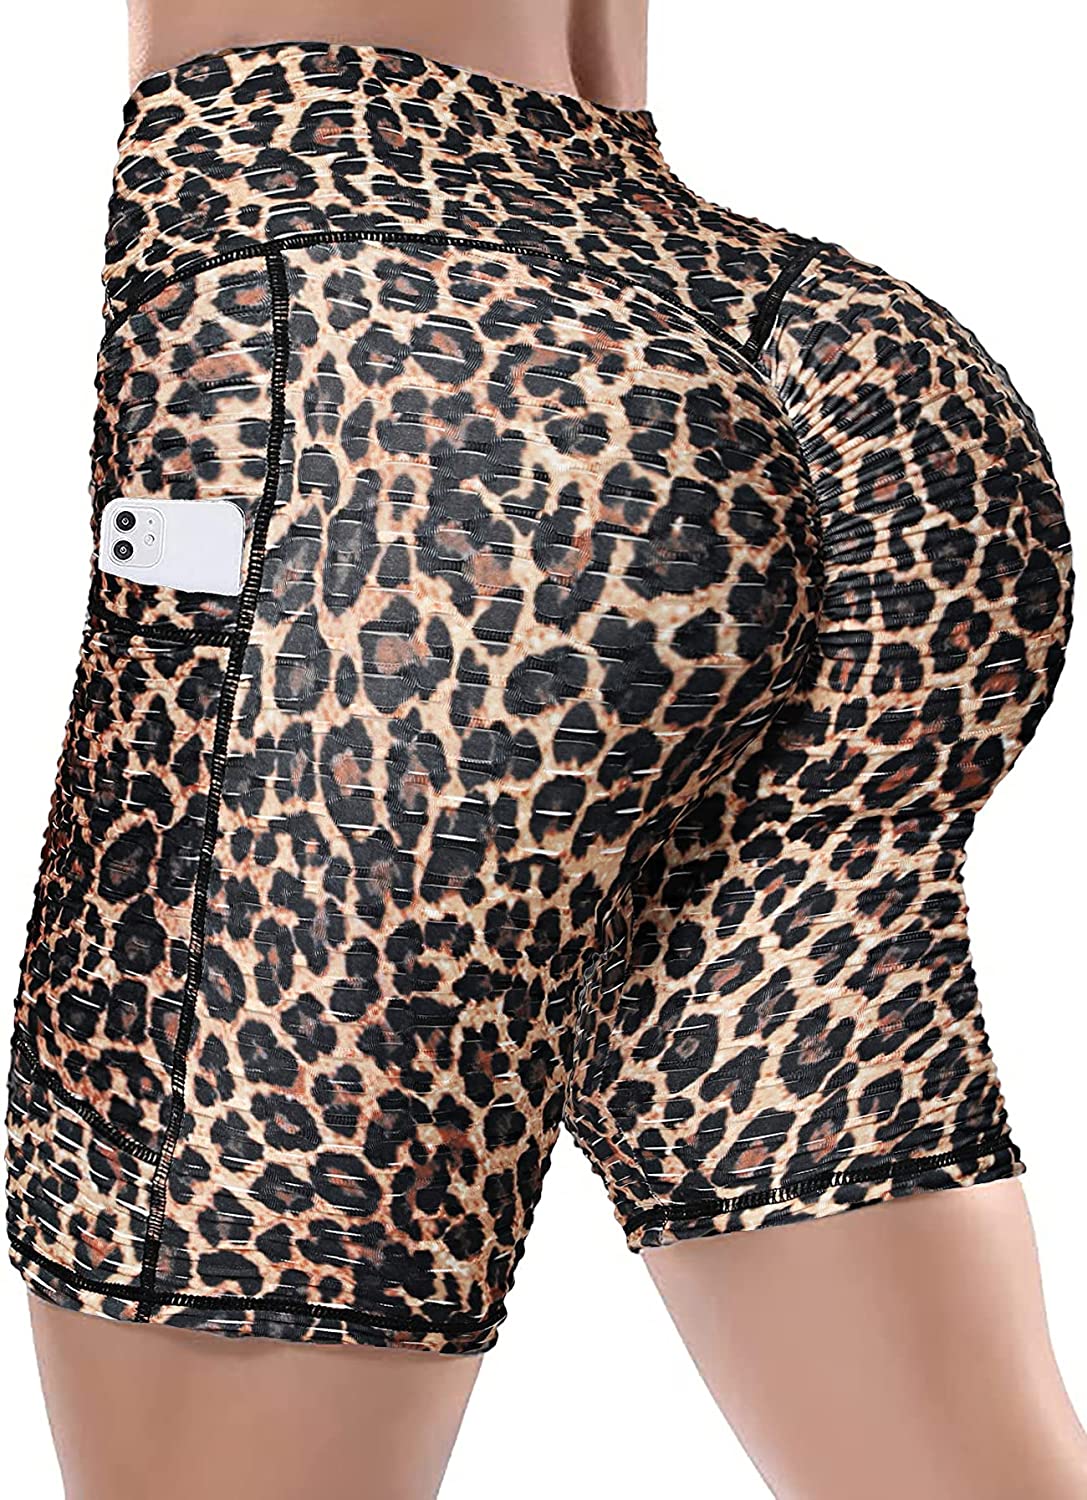 RAYPOSE Yoga Biker Shorts for Women High Waist Leopard Print Running Gym  Workout Shorts with Pockets Plus Size Tiger Skin-L - ShopStyle